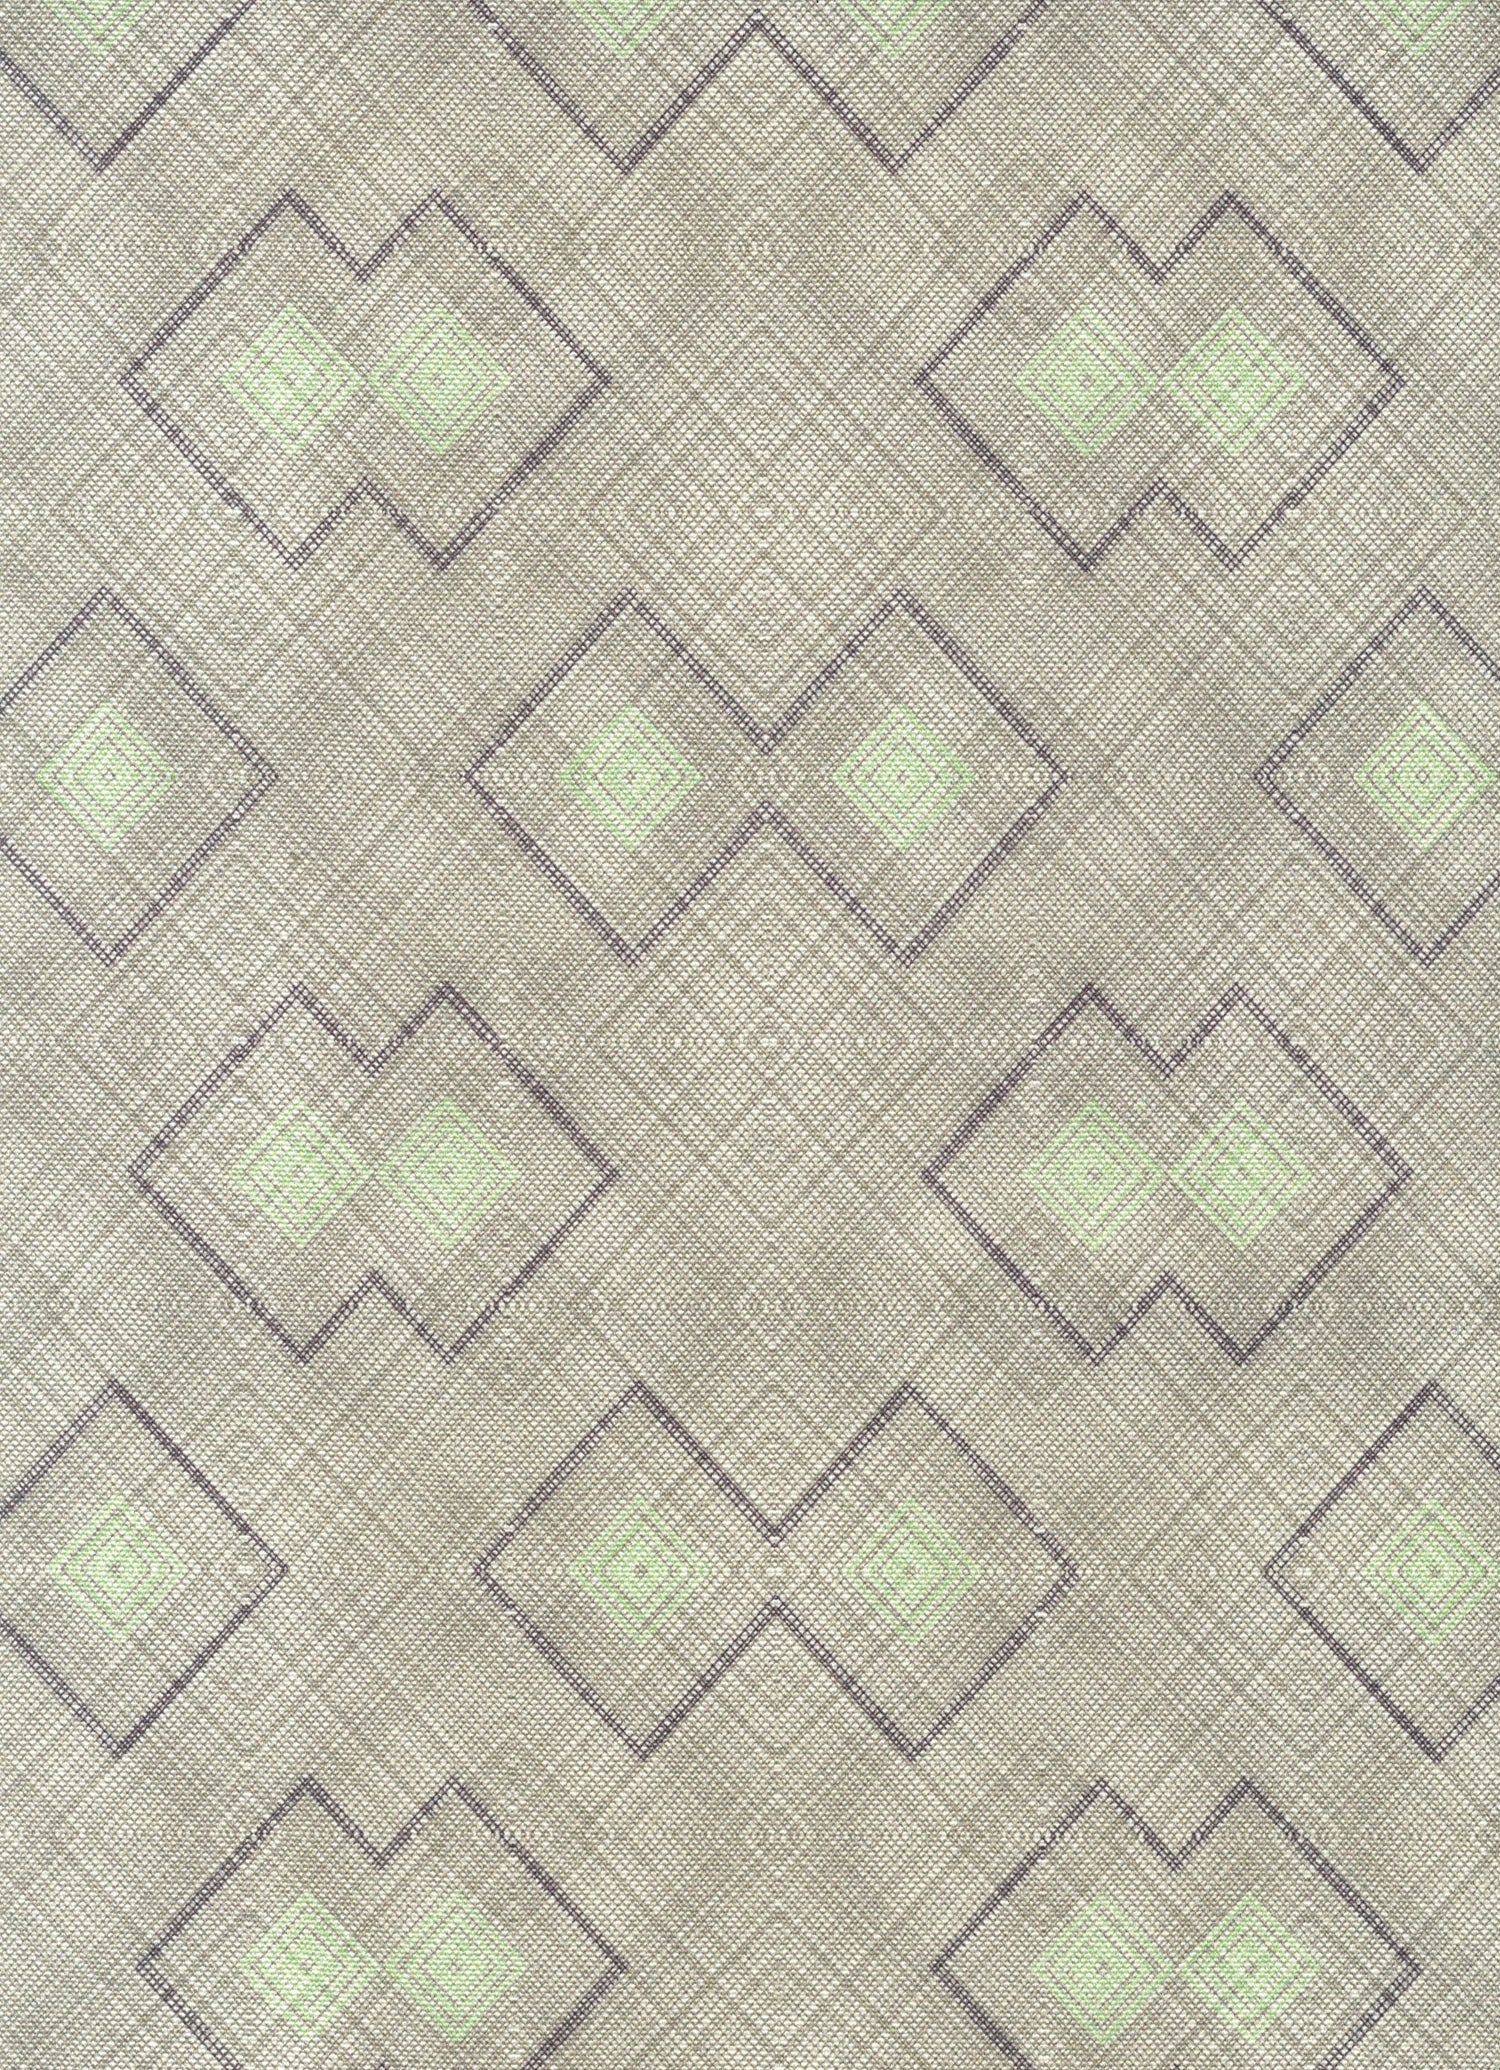 Detail of fabric in a detailed diamond lattice print in shades of light green and purple on a tan field.